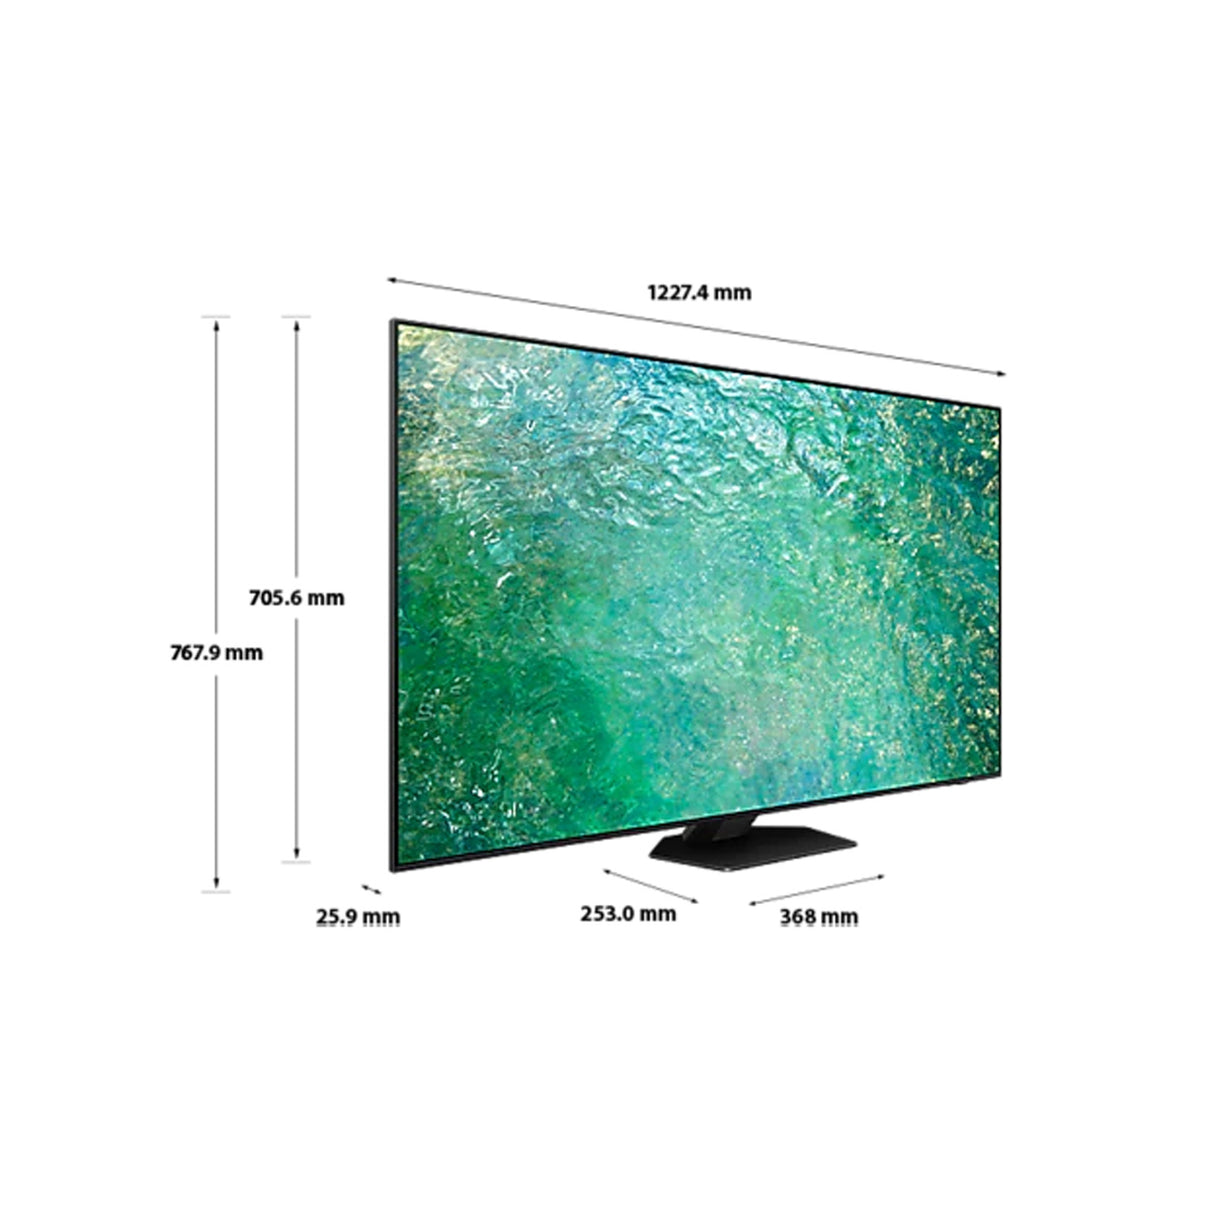 Android TV: Samsung 55" 4K Neo QLED Smart TV with Android.